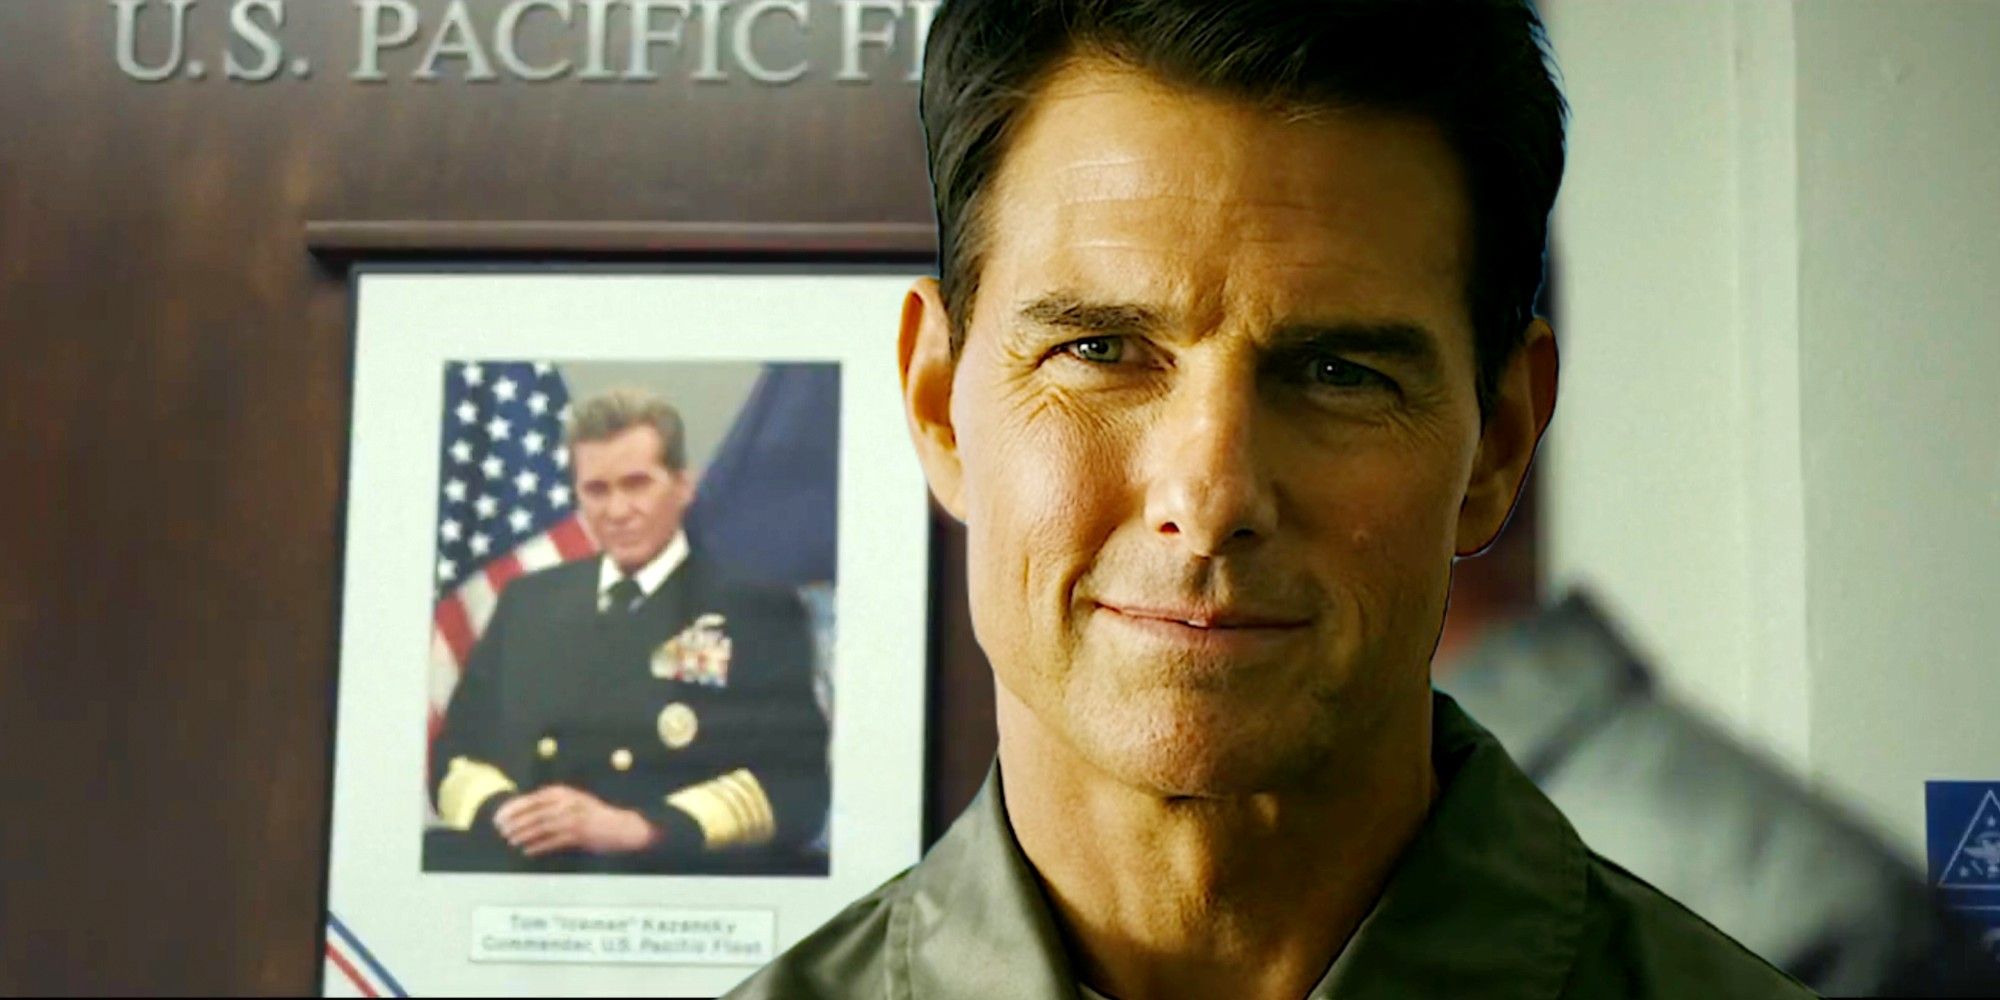 Tom Cruise Reflects On Reuniting With Val Kilmer For Top Gun 2